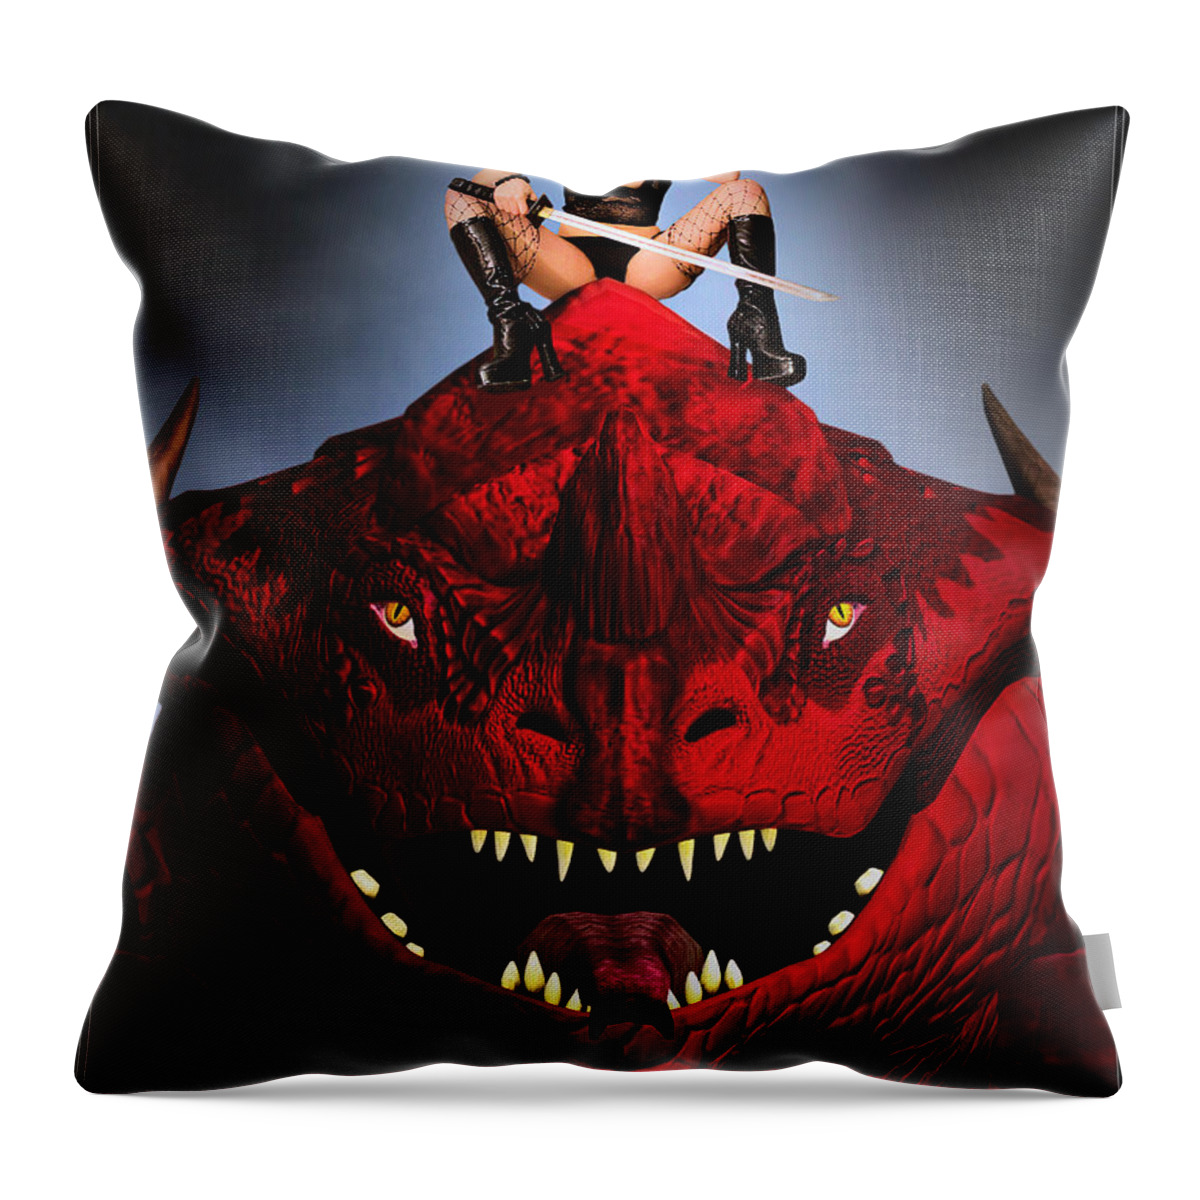 Dragon Throw Pillow featuring the painting Riddle Me This by Jon Volden